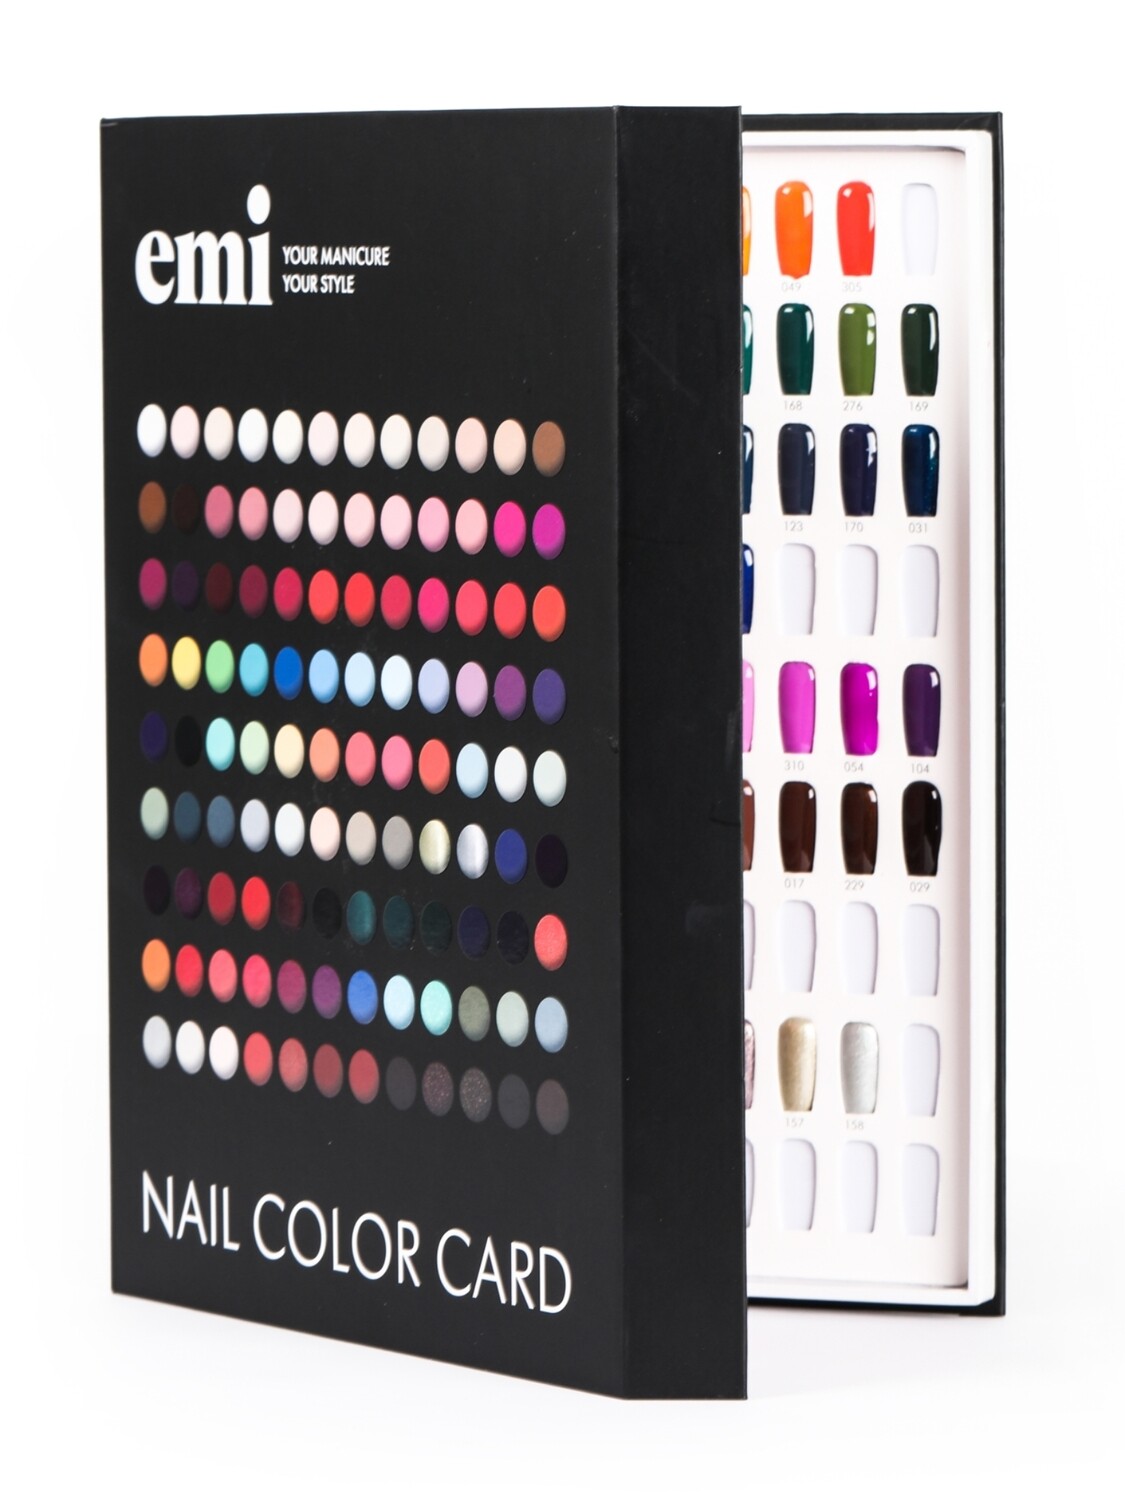 Nail Color Book with tips and numbers